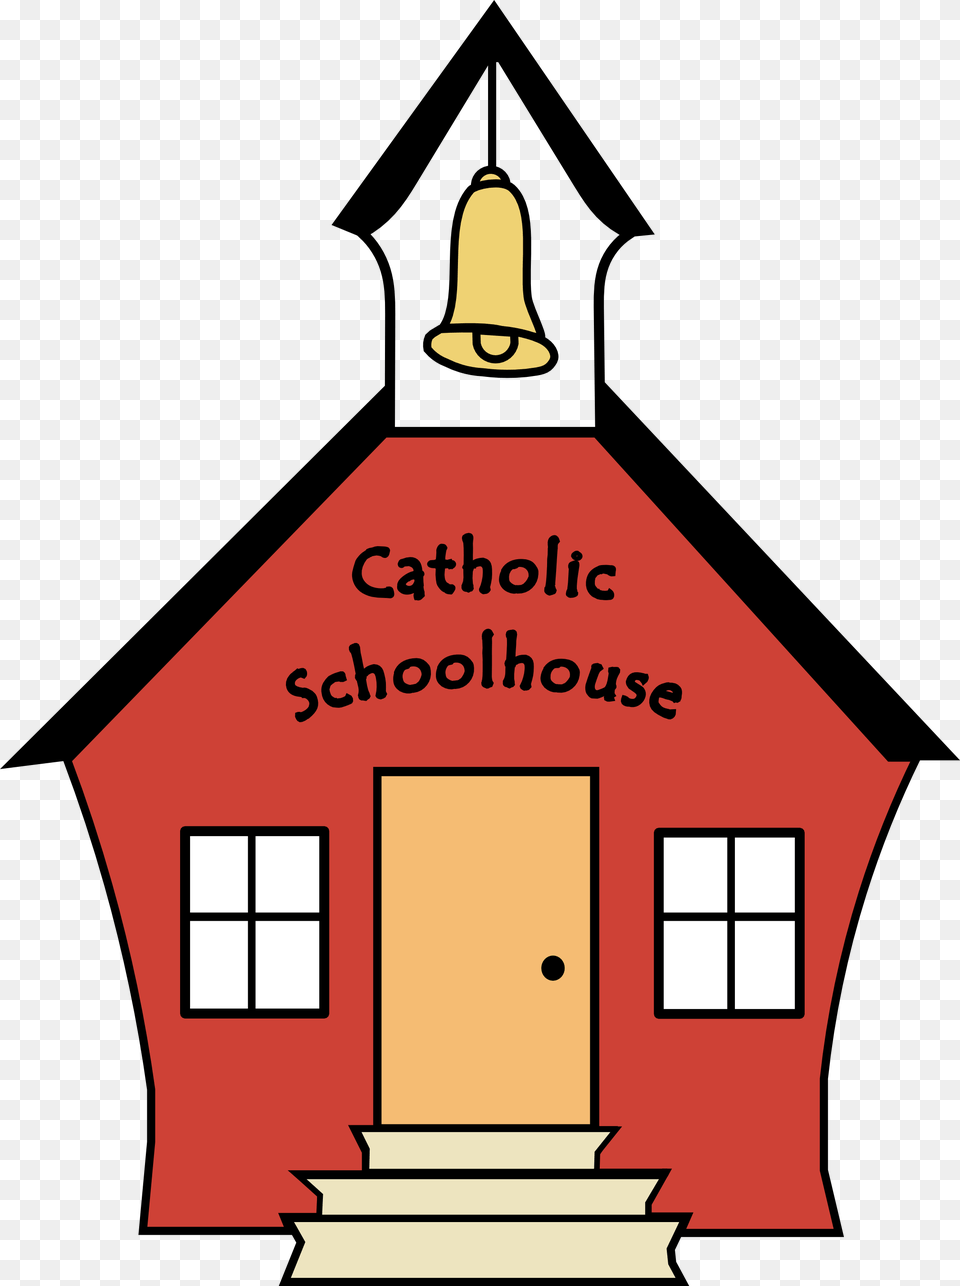 Save Catholic Schoolhouse, Architecture, Bell Tower, Building, Tower Png